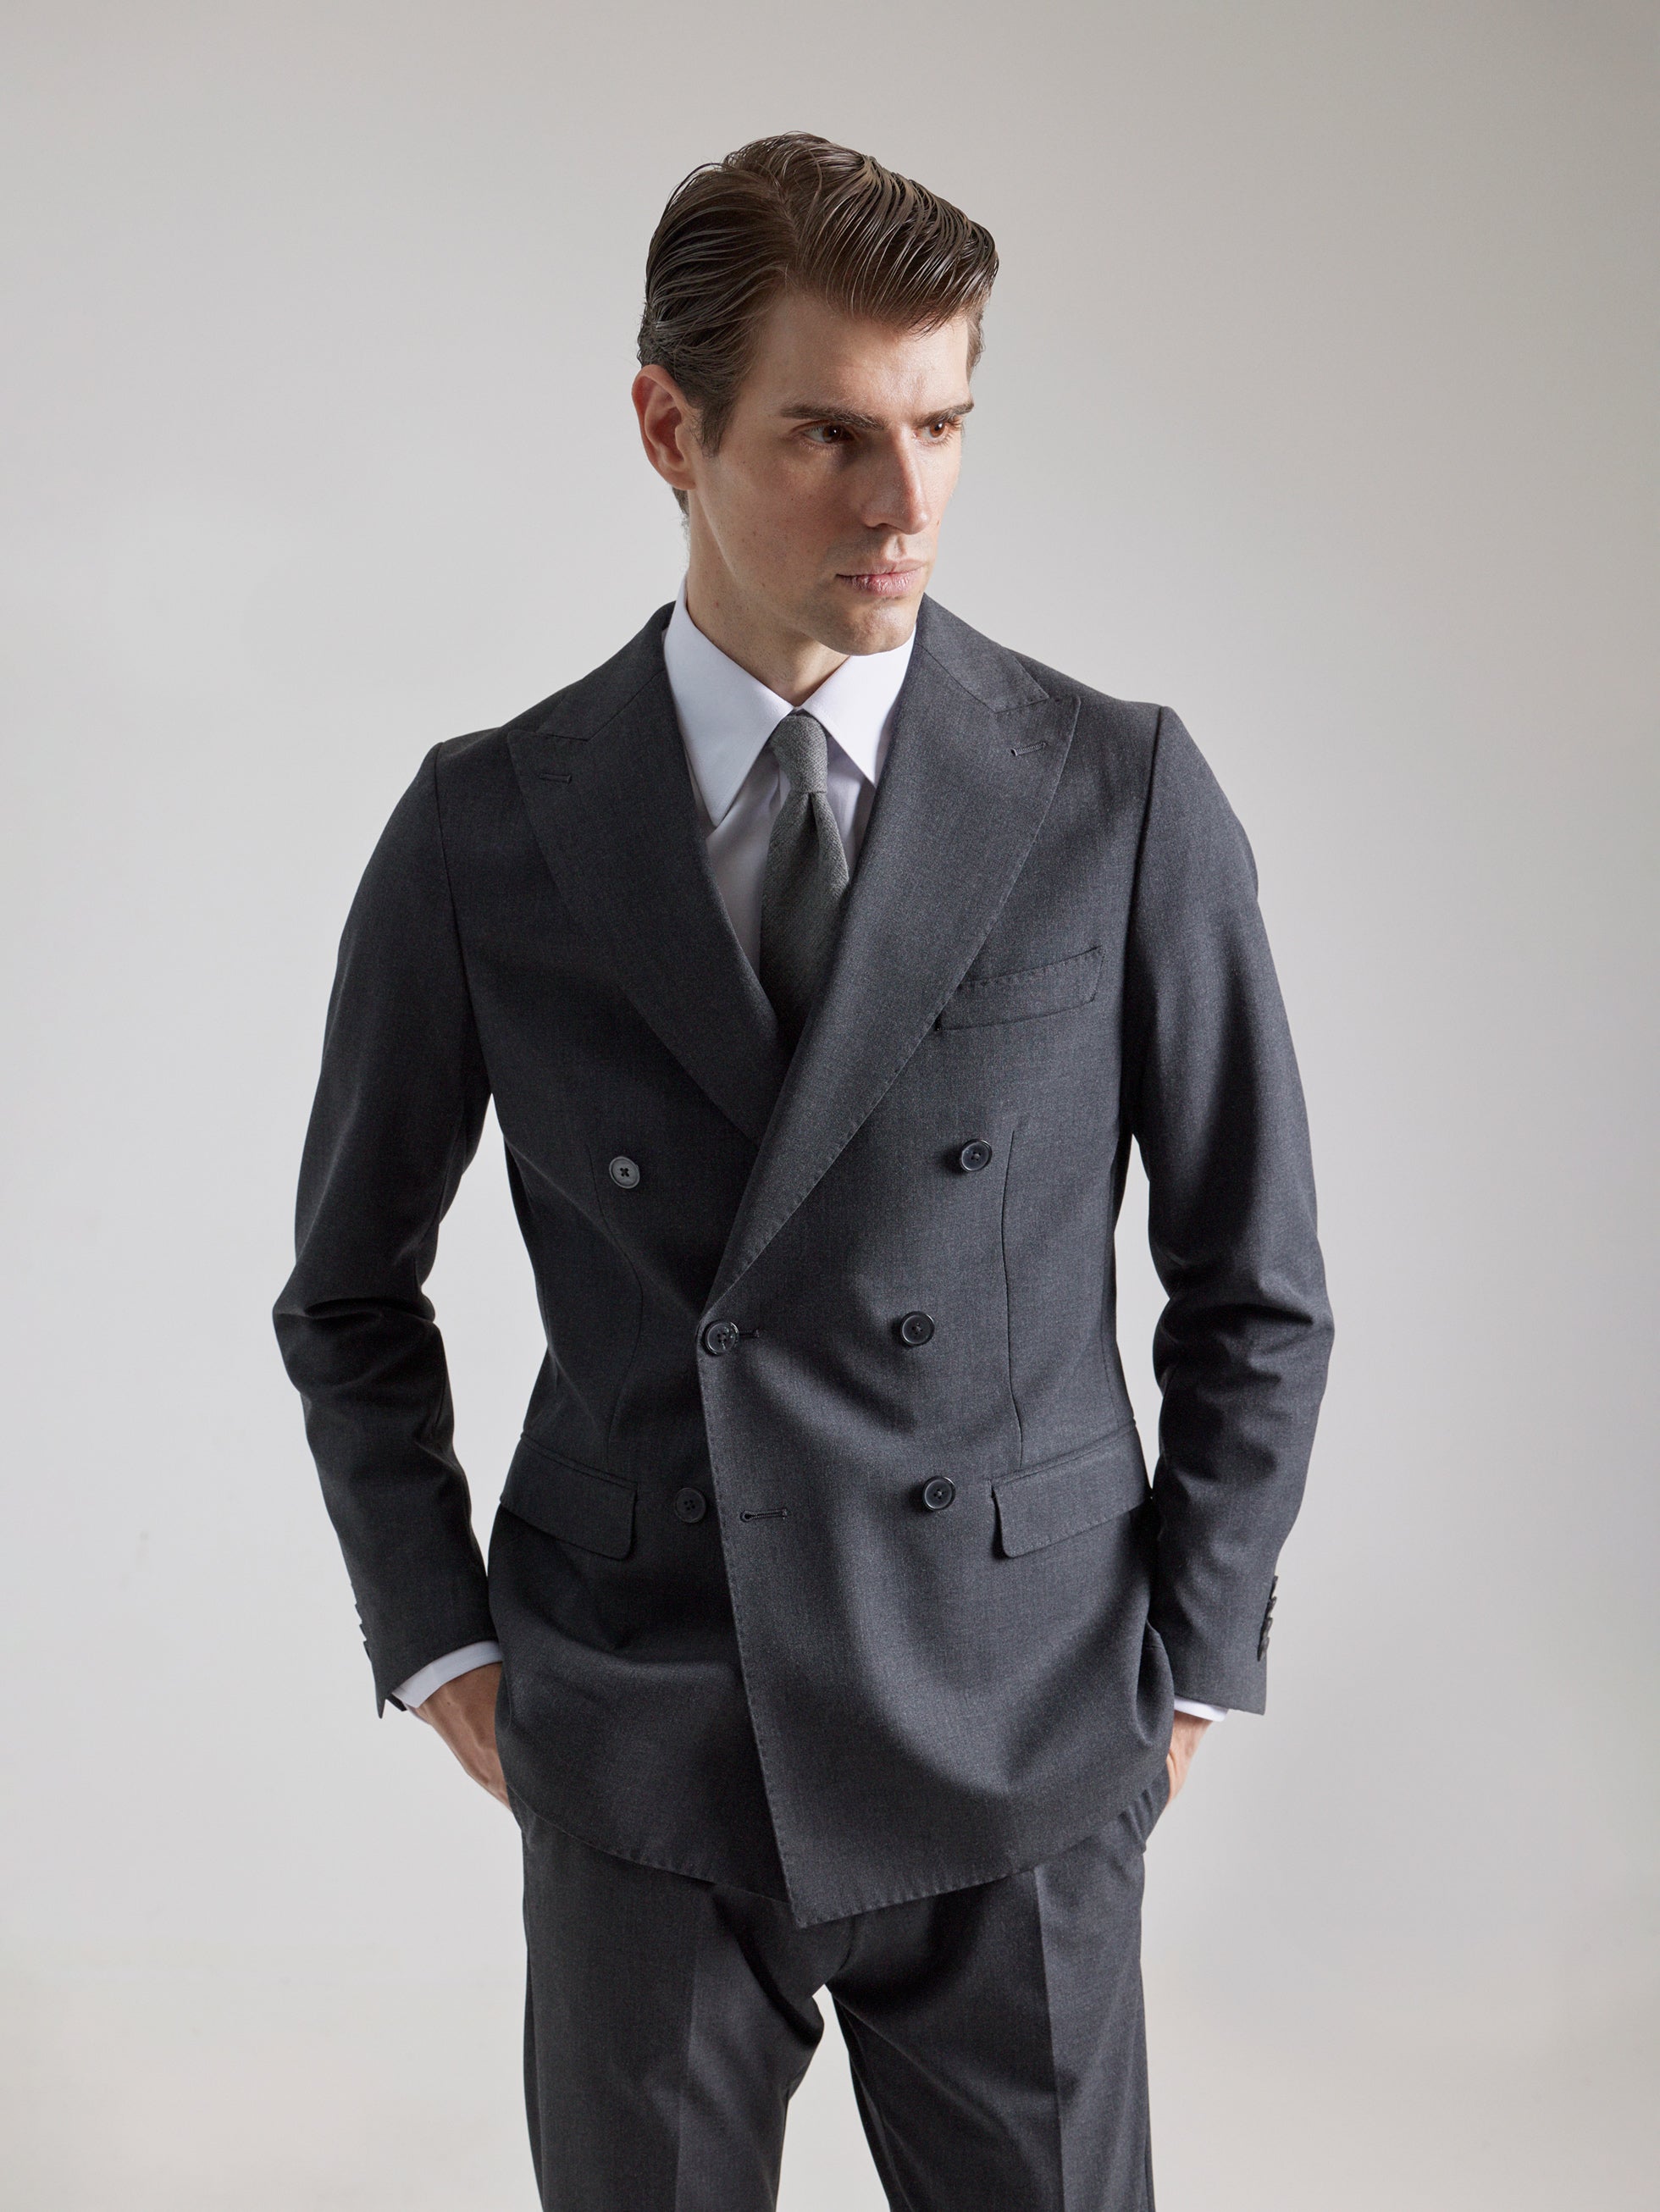 DARK GREY DOUBLE-BREASTED SUIT